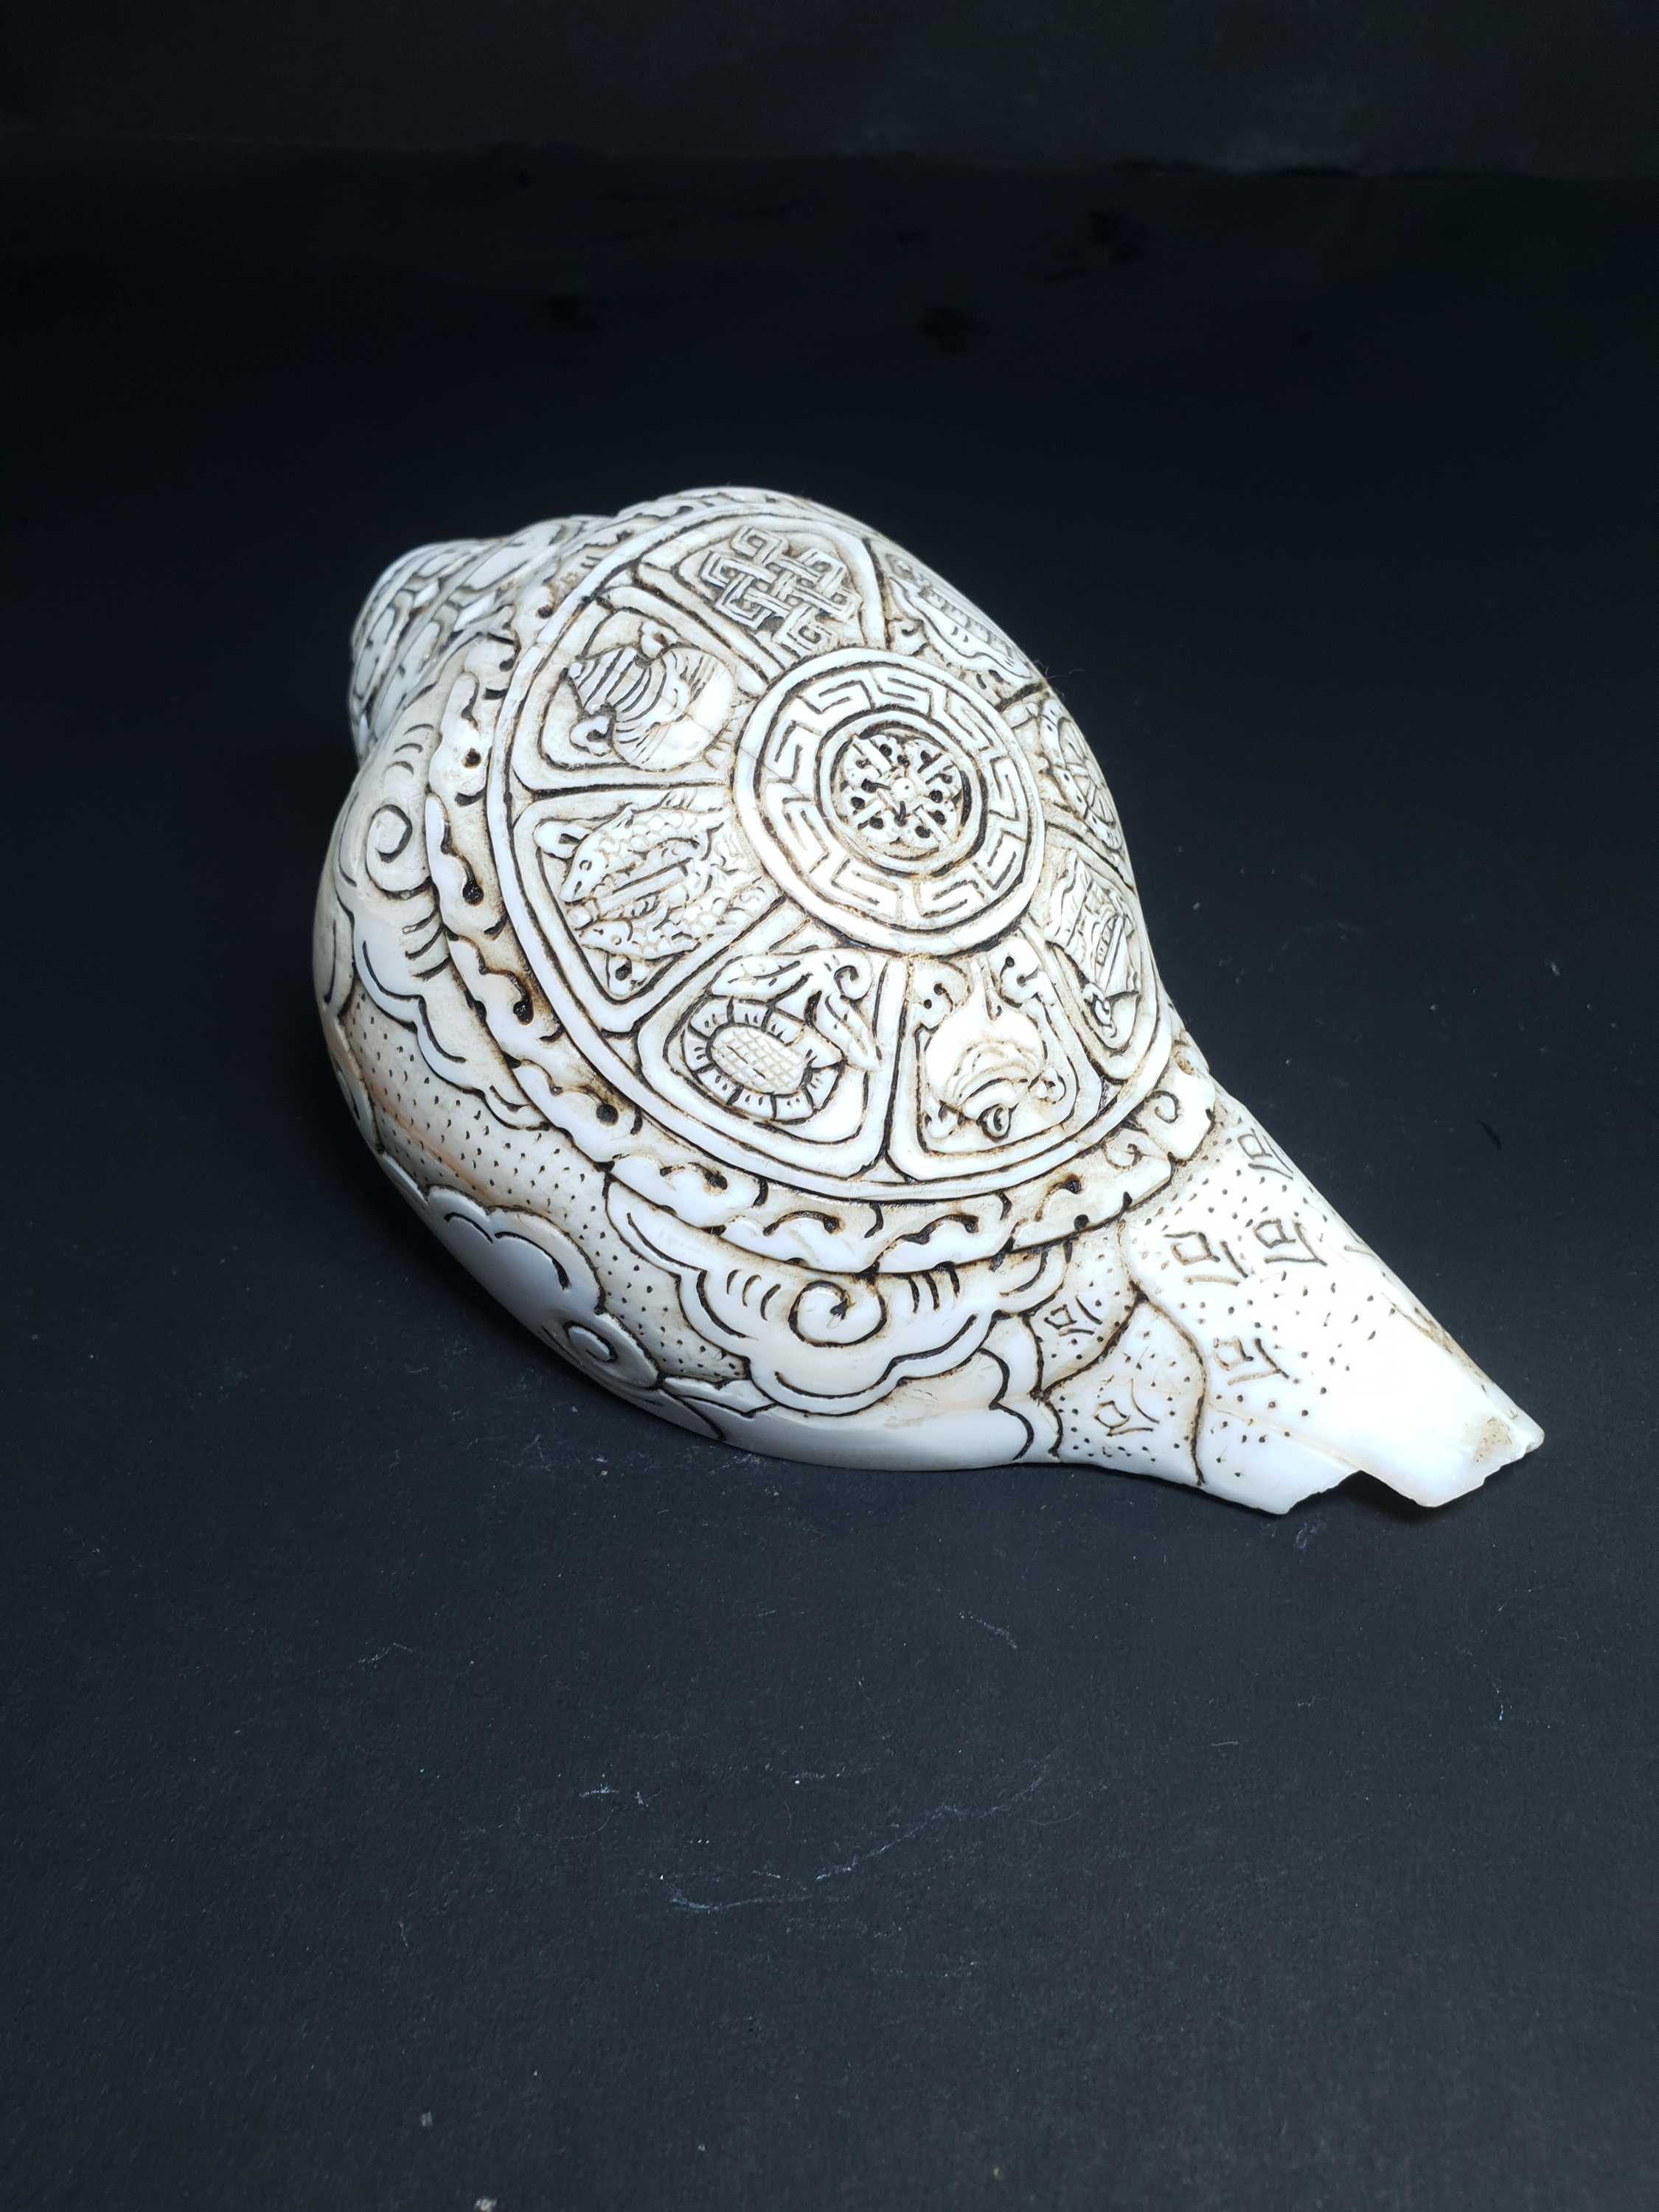 Tibetan Conch Shell With Ashtamangala S hand Carved